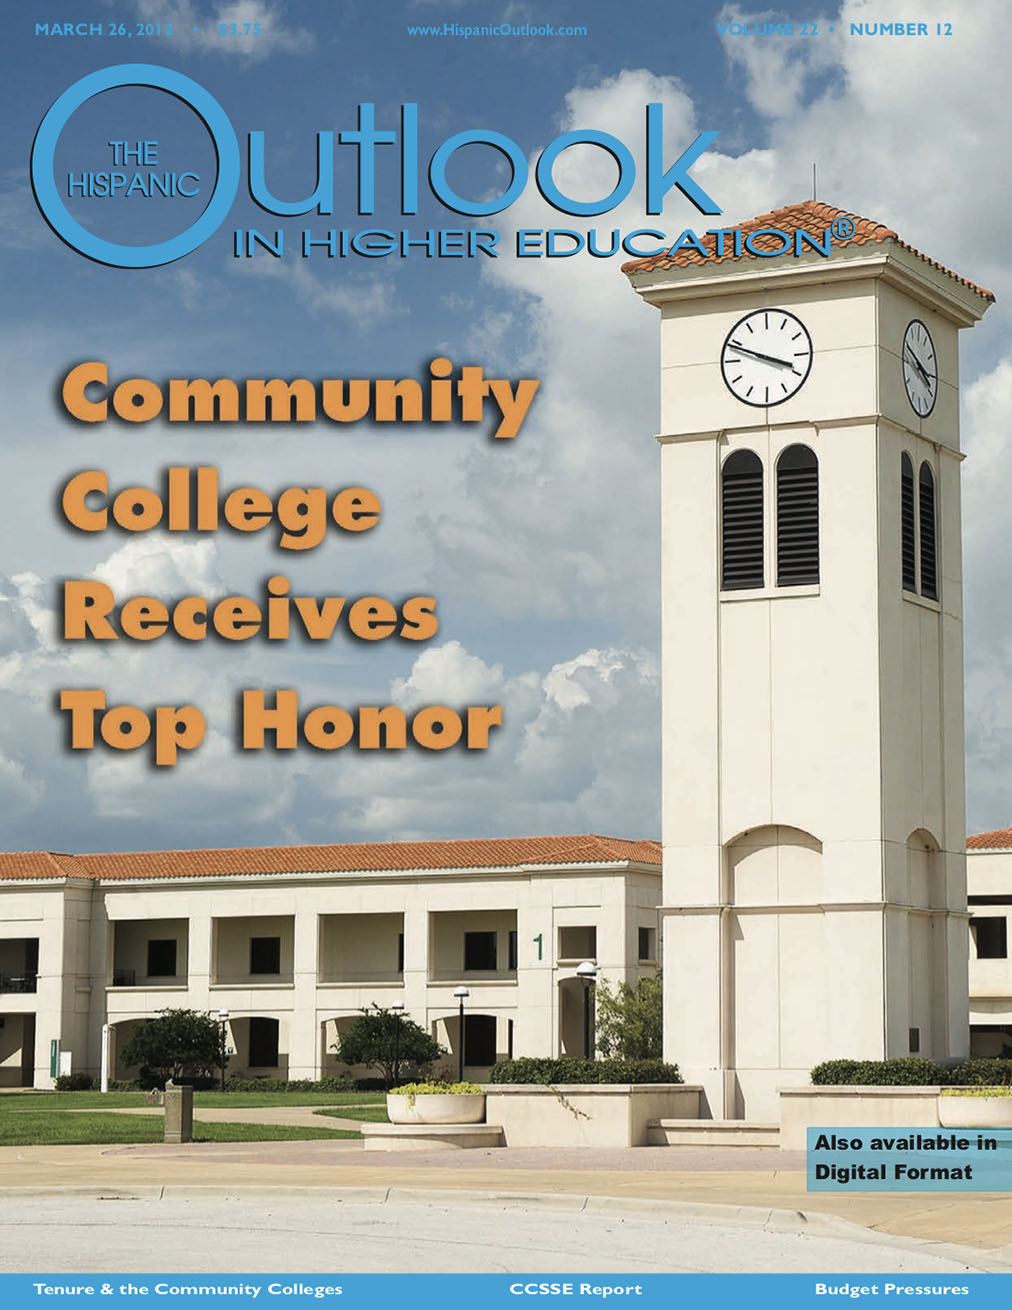 Community College receives top honor